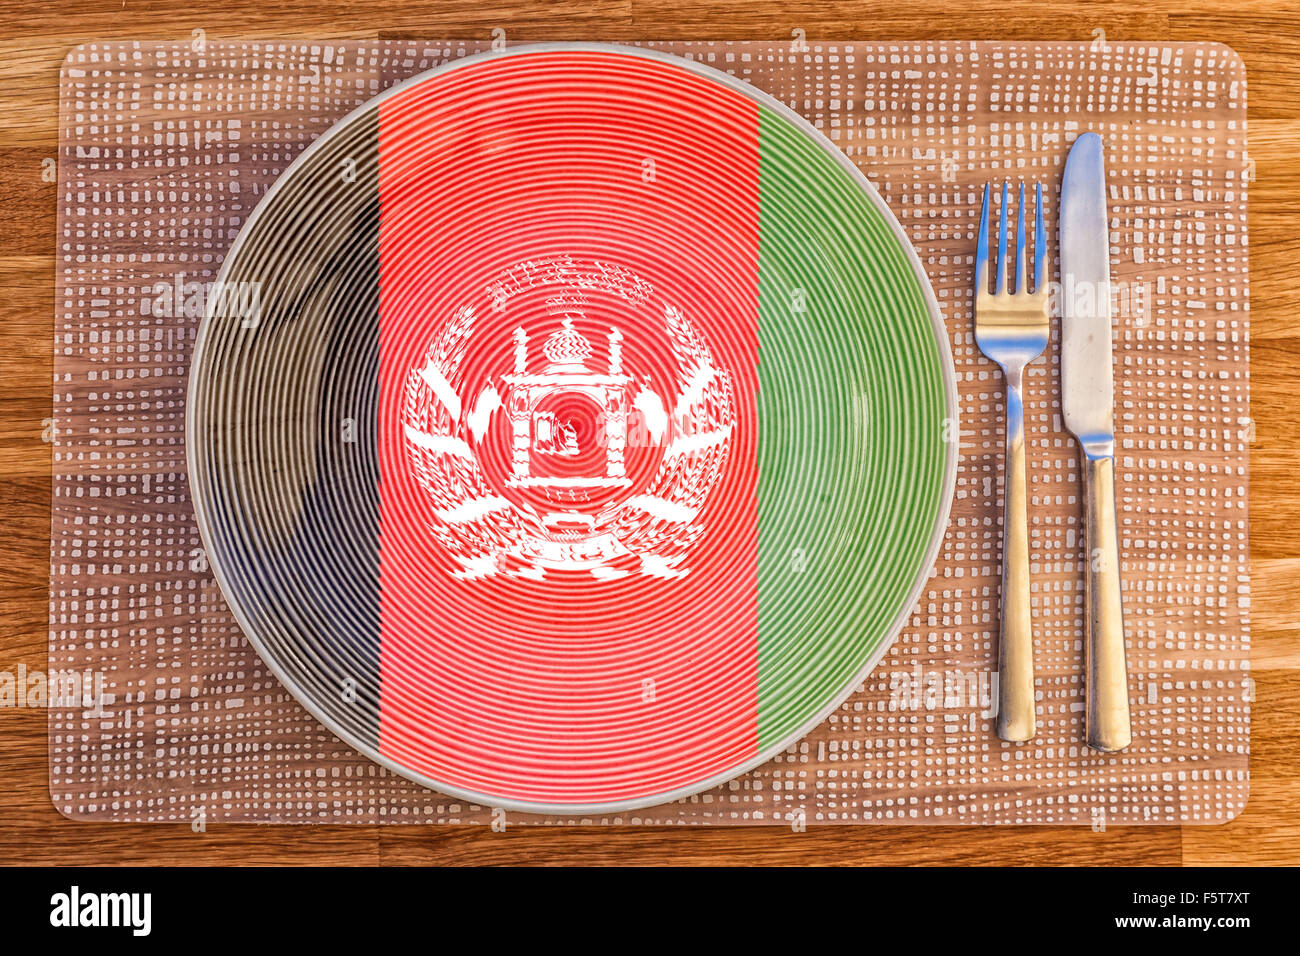 Dinner plate with the flag of Afghanistan on it for your international food and drink concepts. Stock Photo